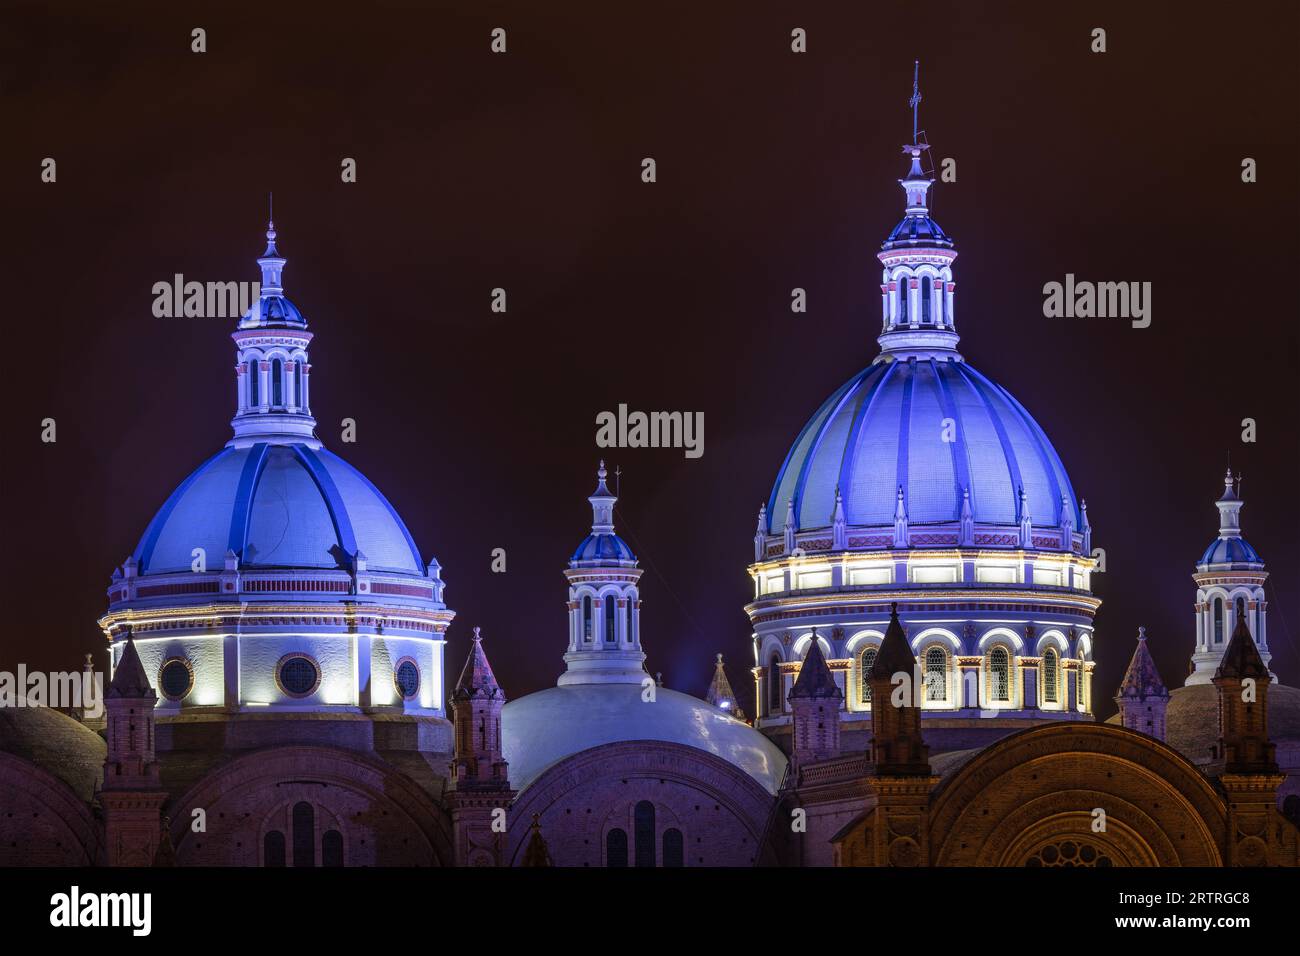 Illuminated domes of the New Cathedral, Cuenca, Ecuador. Stock Photo